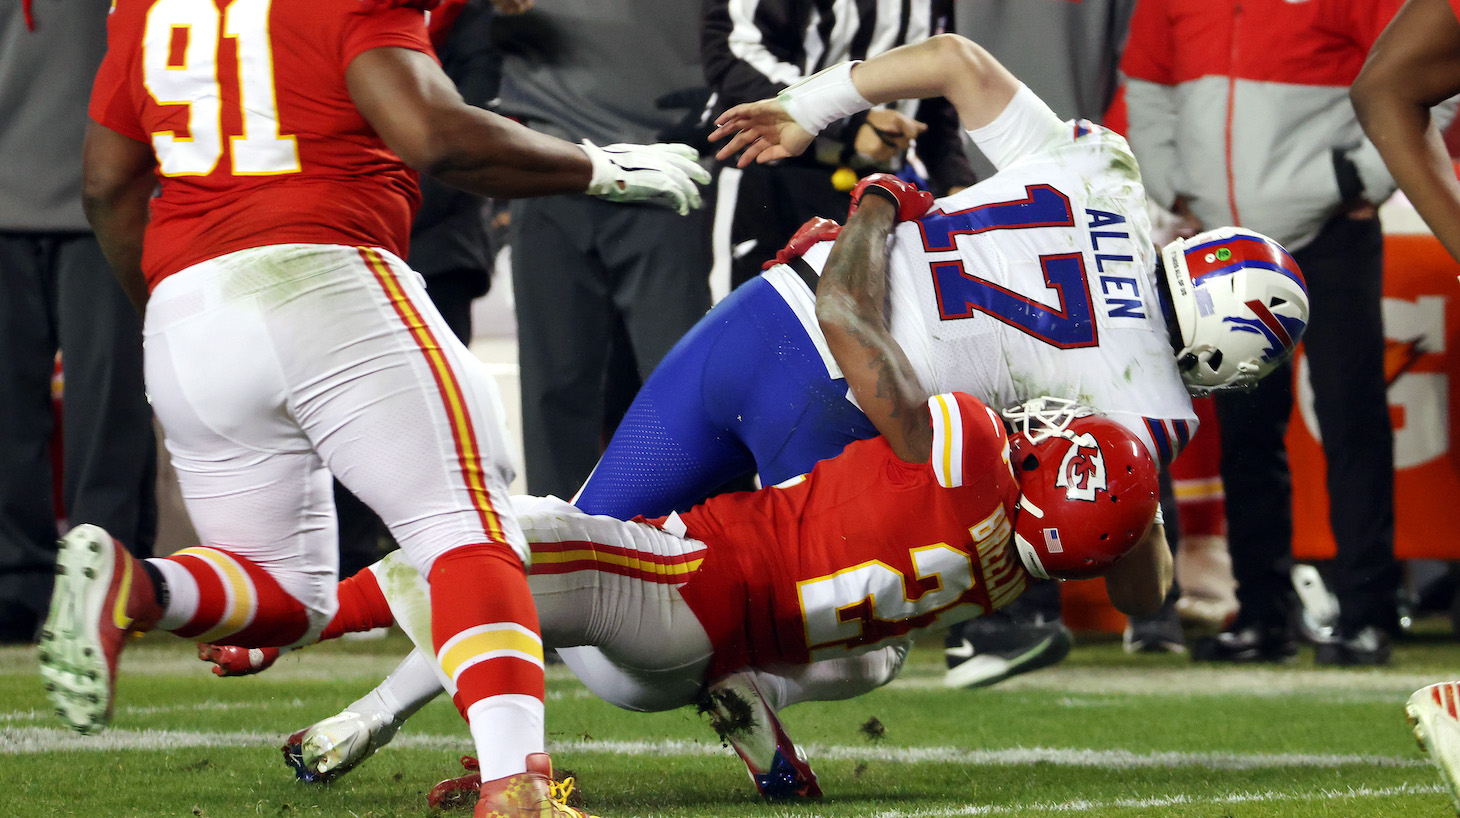 KANSAS CITY, MISSOURI - JANUARY 24: Josh Allen #17 of the Buffalo Bills is tackled by Bashaud Breeland #21 of the Kansas City Chiefs in the third quarter during the AFC Championship game at Arrowhead Stadium on January 24, 2021 in Kansas City, Missouri. (Photo by Jamie Squire/Getty Images)